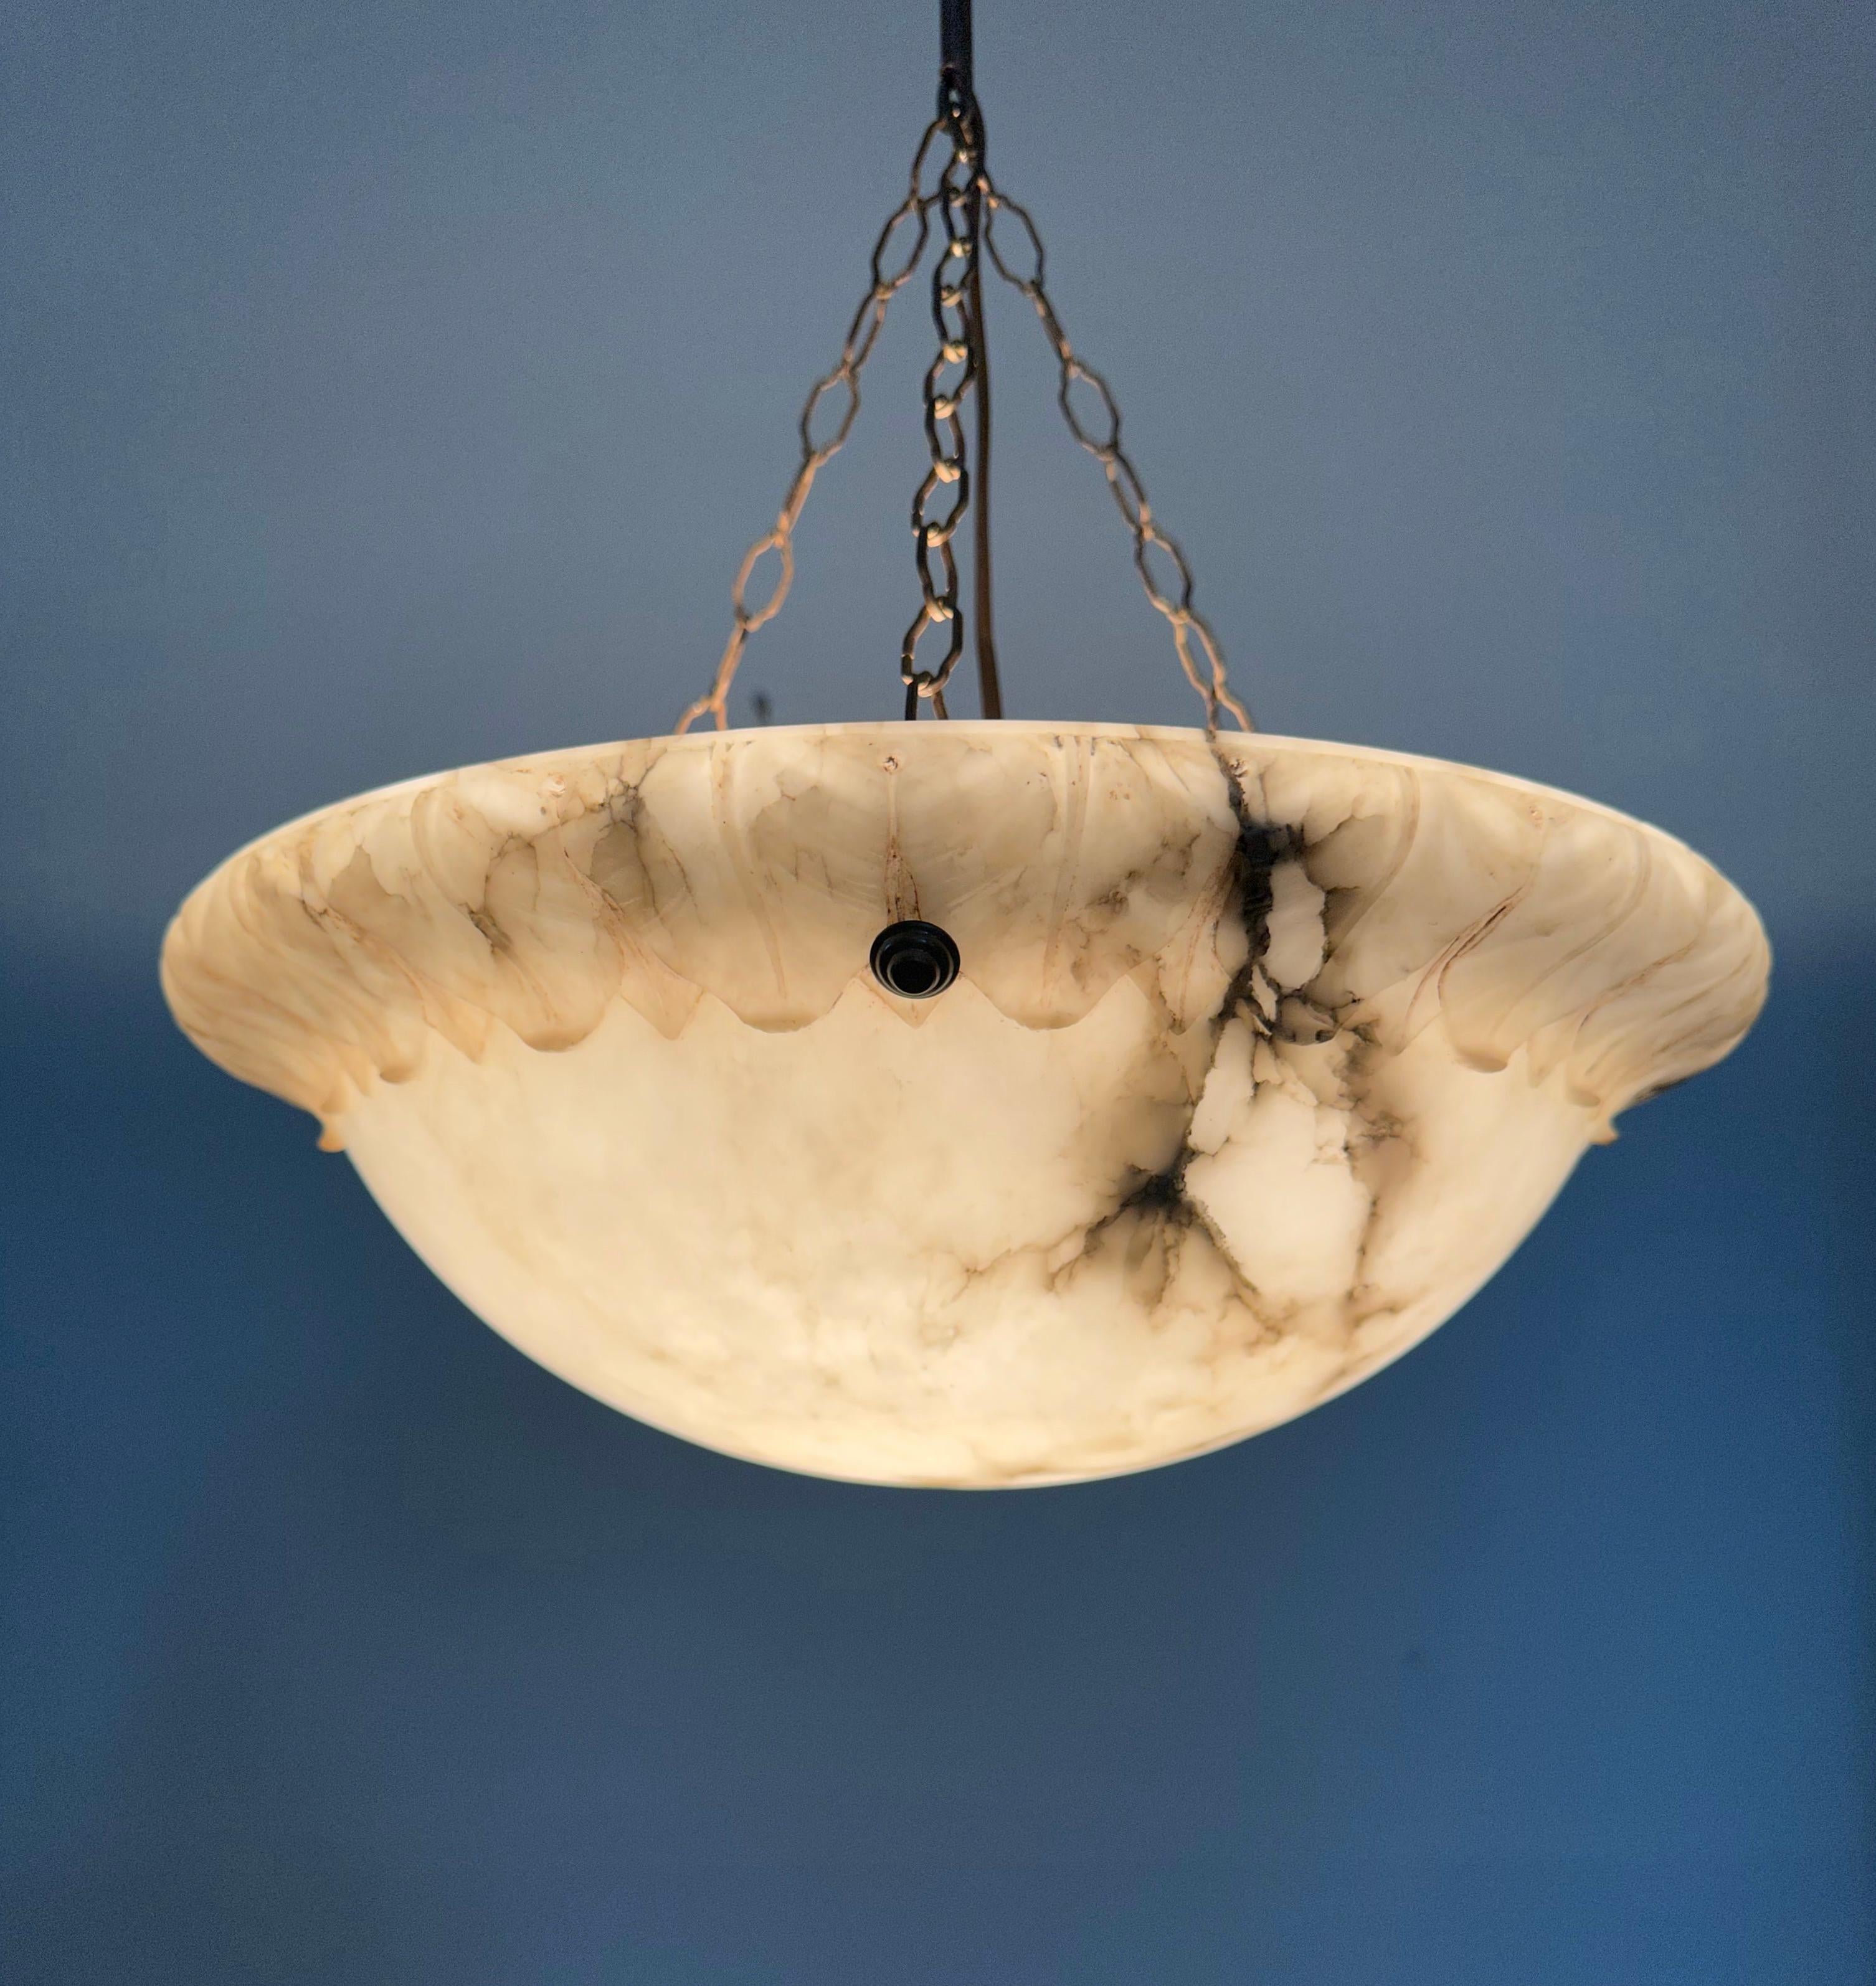 Great Looking Antique and Mint Condition White & Black Alabaster Pendant Light 12